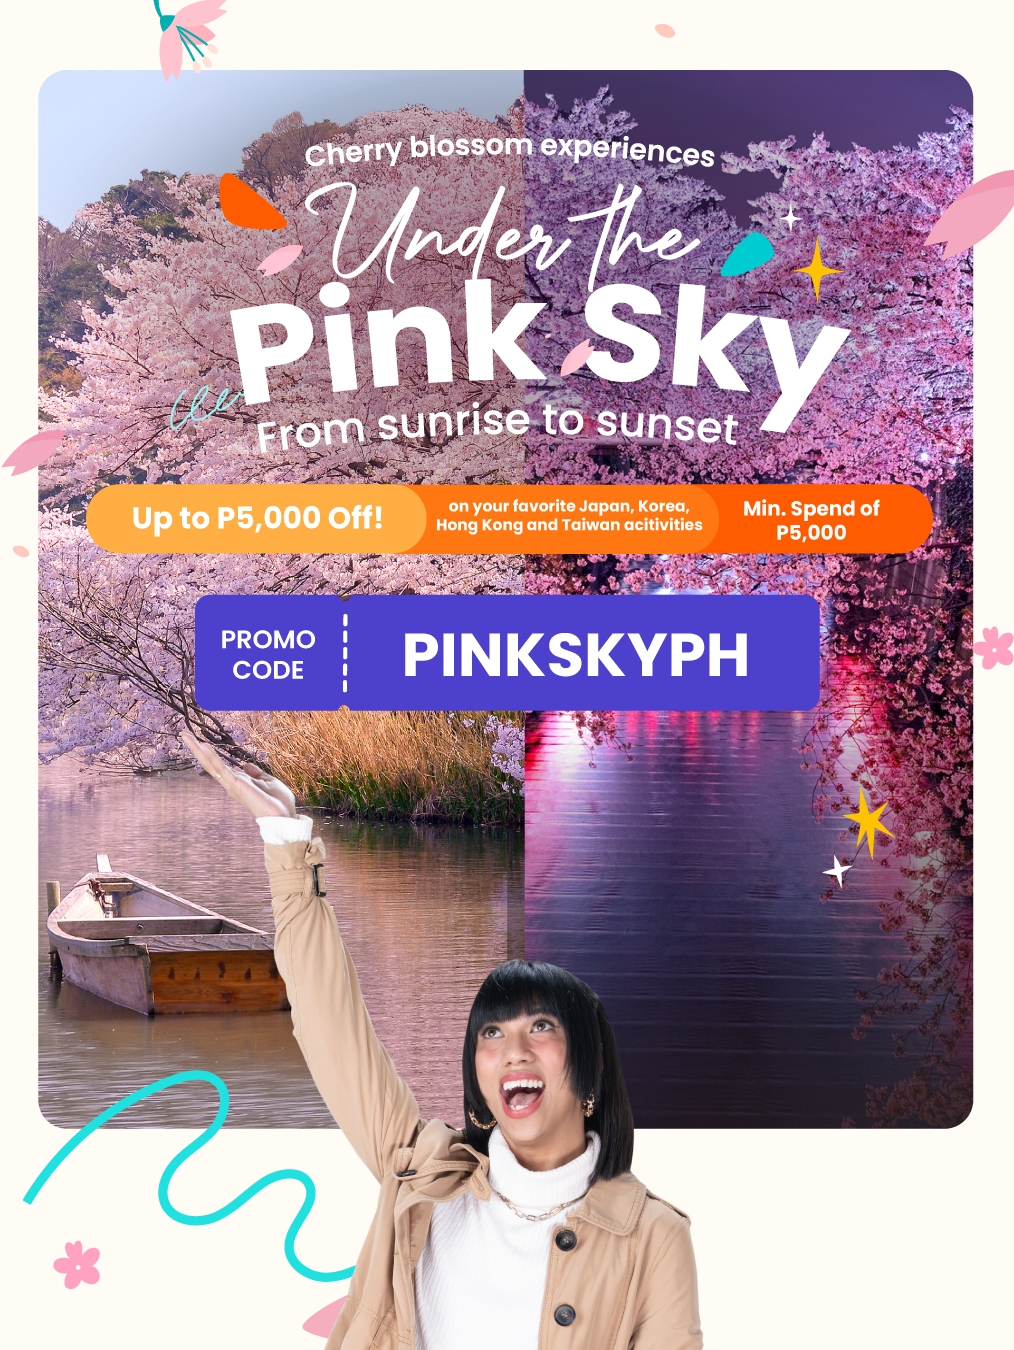 Cherry Blossom Travel Packages Under the Pink Sky Klook Promo Code